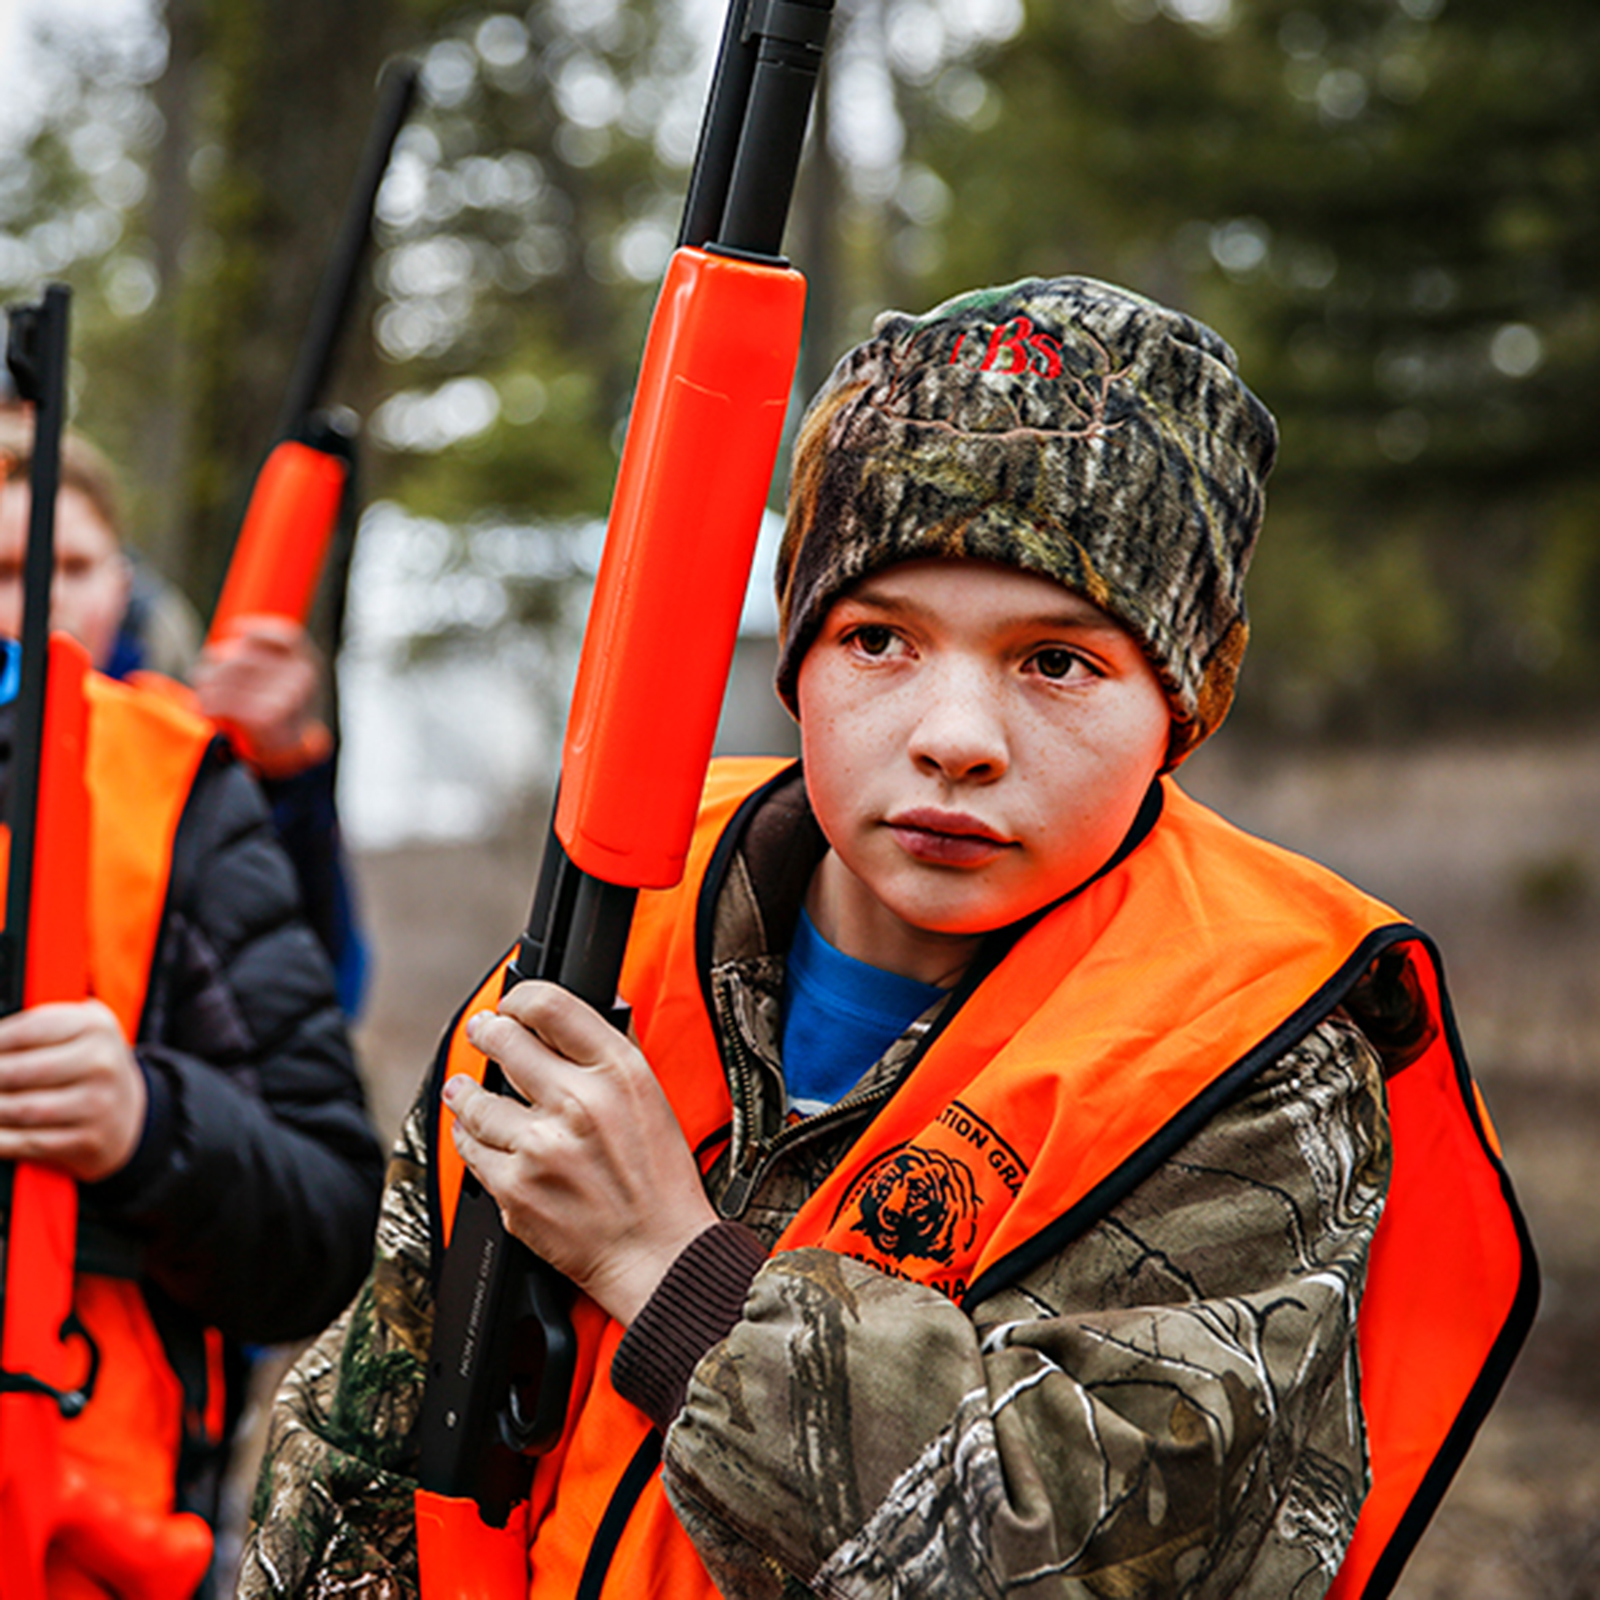 Hunter Education Rooted in Safety and Tradition - Flathead Beacon